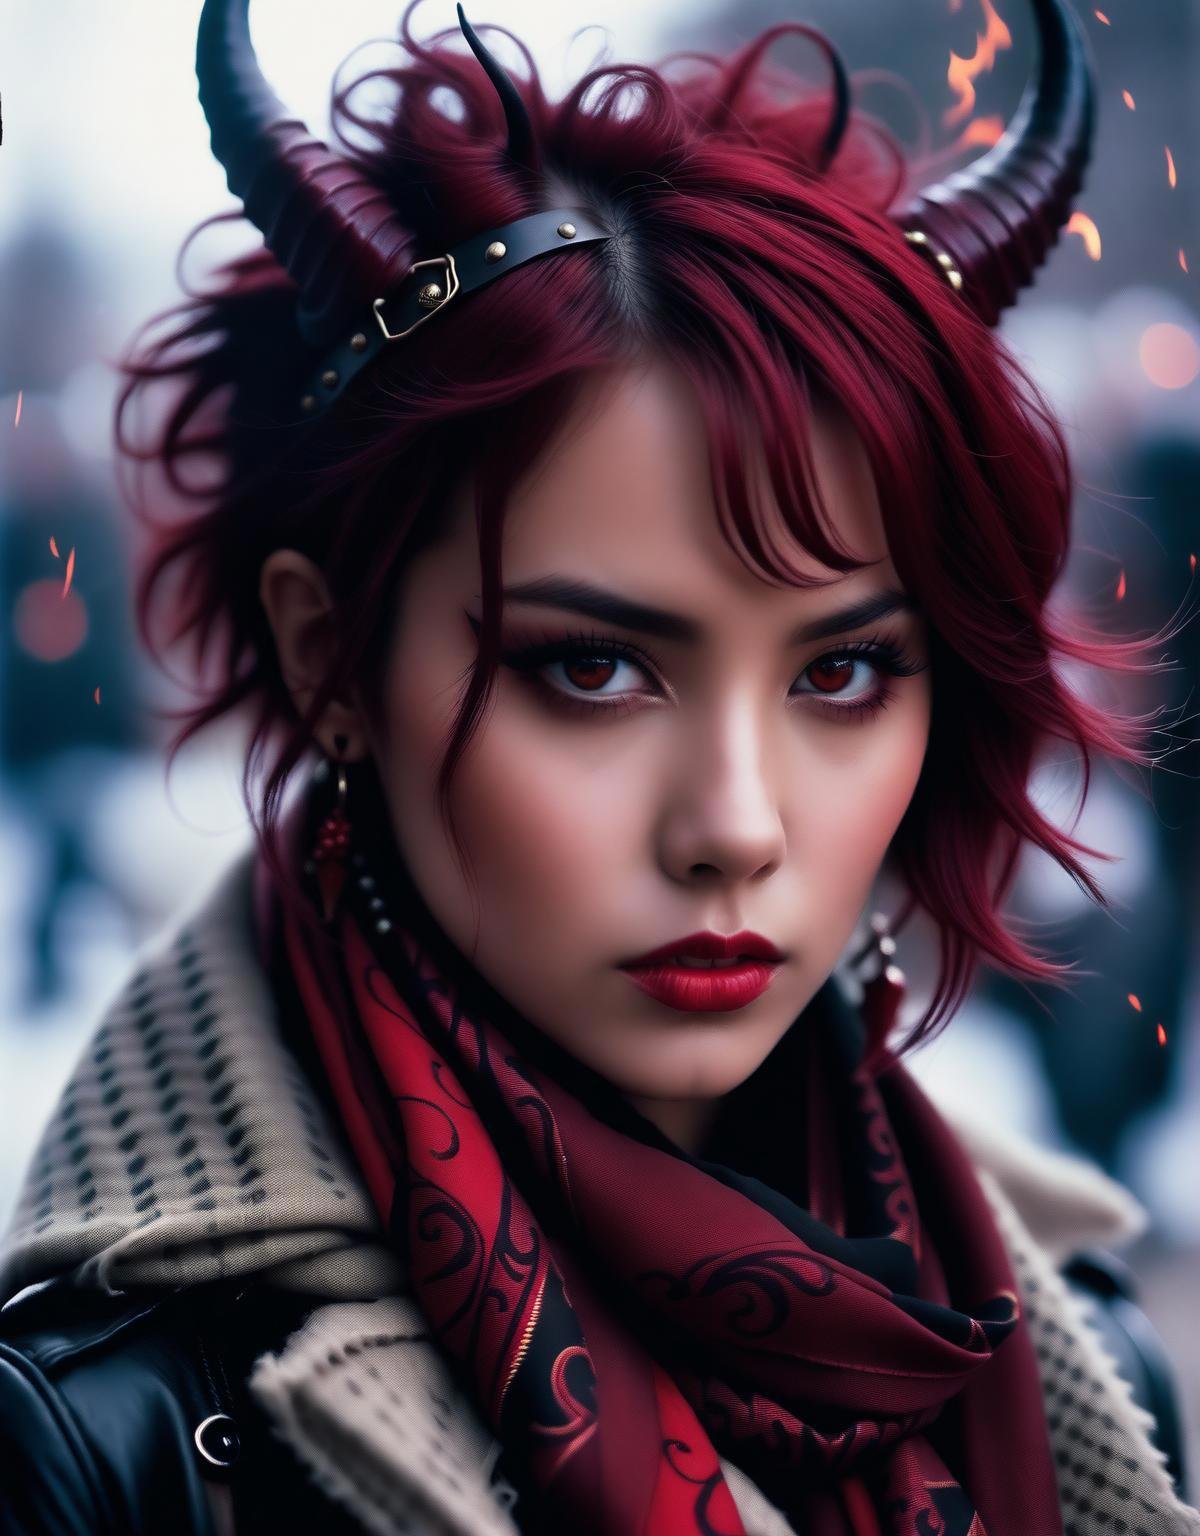 photograph, punk young_female_demon, red skin tone, (VAE batch), dark eyesLight hair styled as Wavy, Horns, Scarf, Lonely, hell, fire, Decopunk, film grain, Phase One XF IQ4 150MP, 35mm, art by Bojan Jevtic